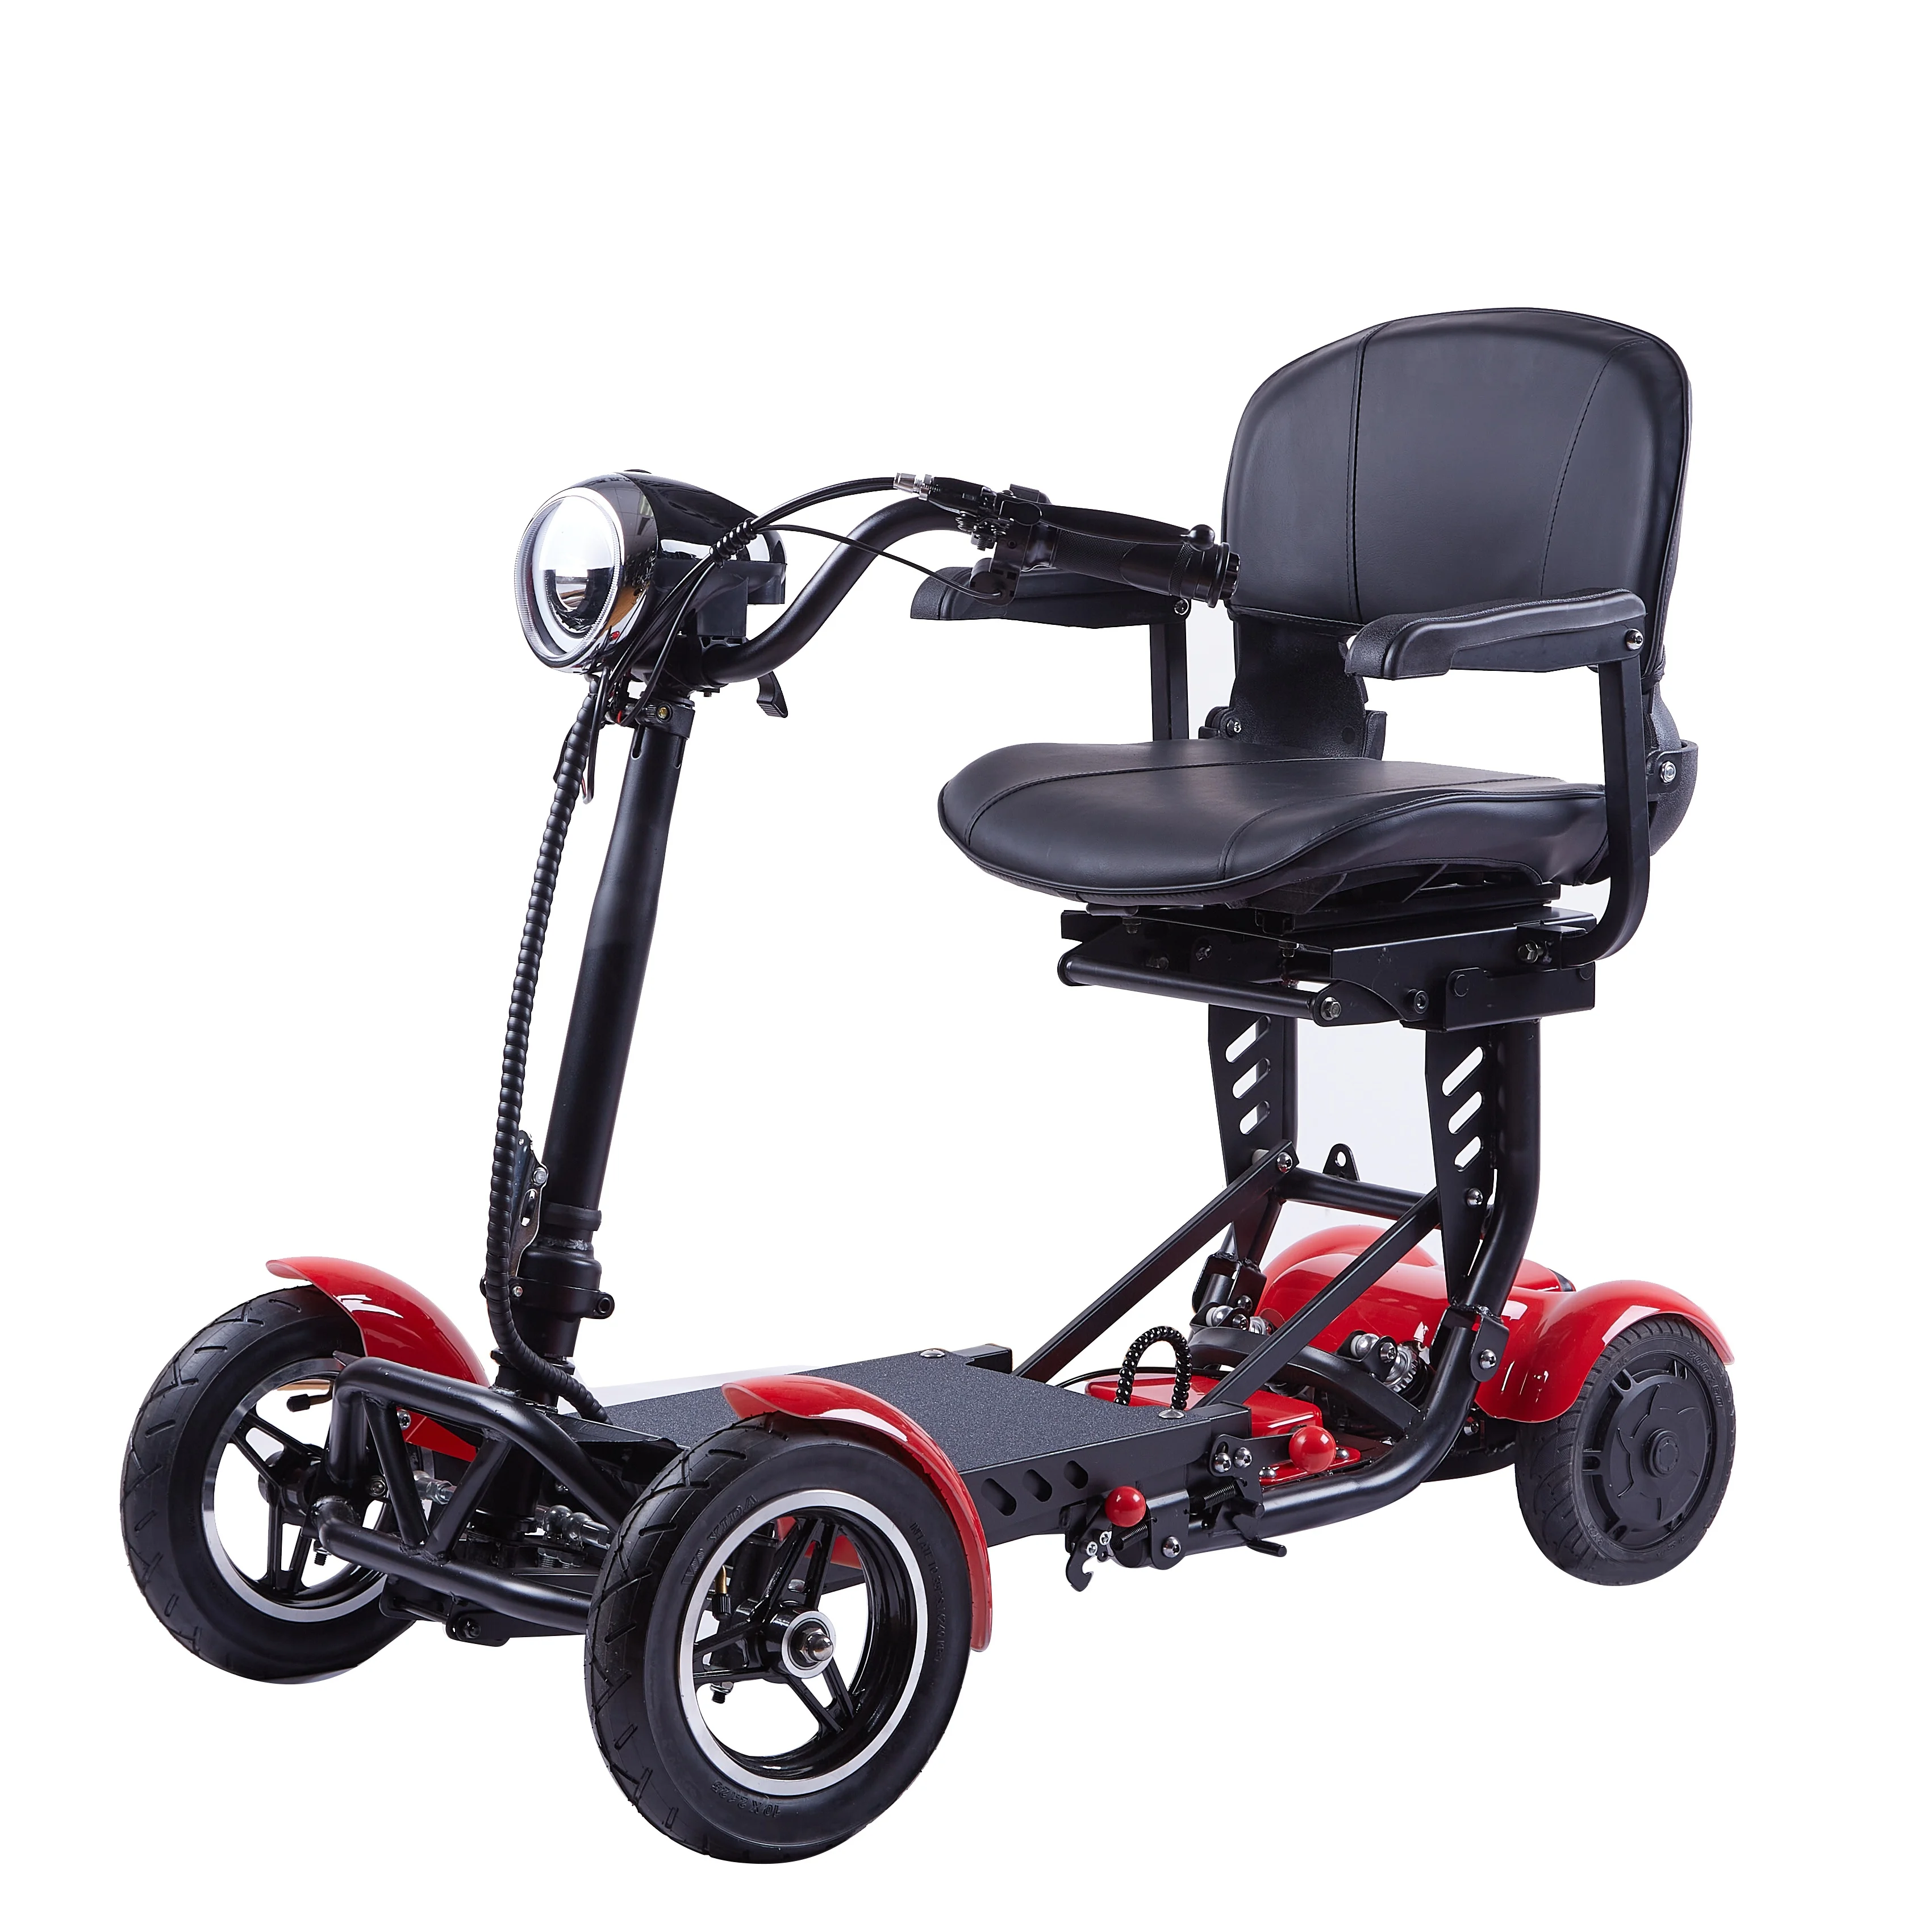 Electric Tricycle 4 Wheel Electric Scooter China Manufacturer Elderly Adult Folding Scooter 12 Inch Sine Wave Motor new best selling factory price senior 3 wheel electric scooter mobility tricycles motor for elderly